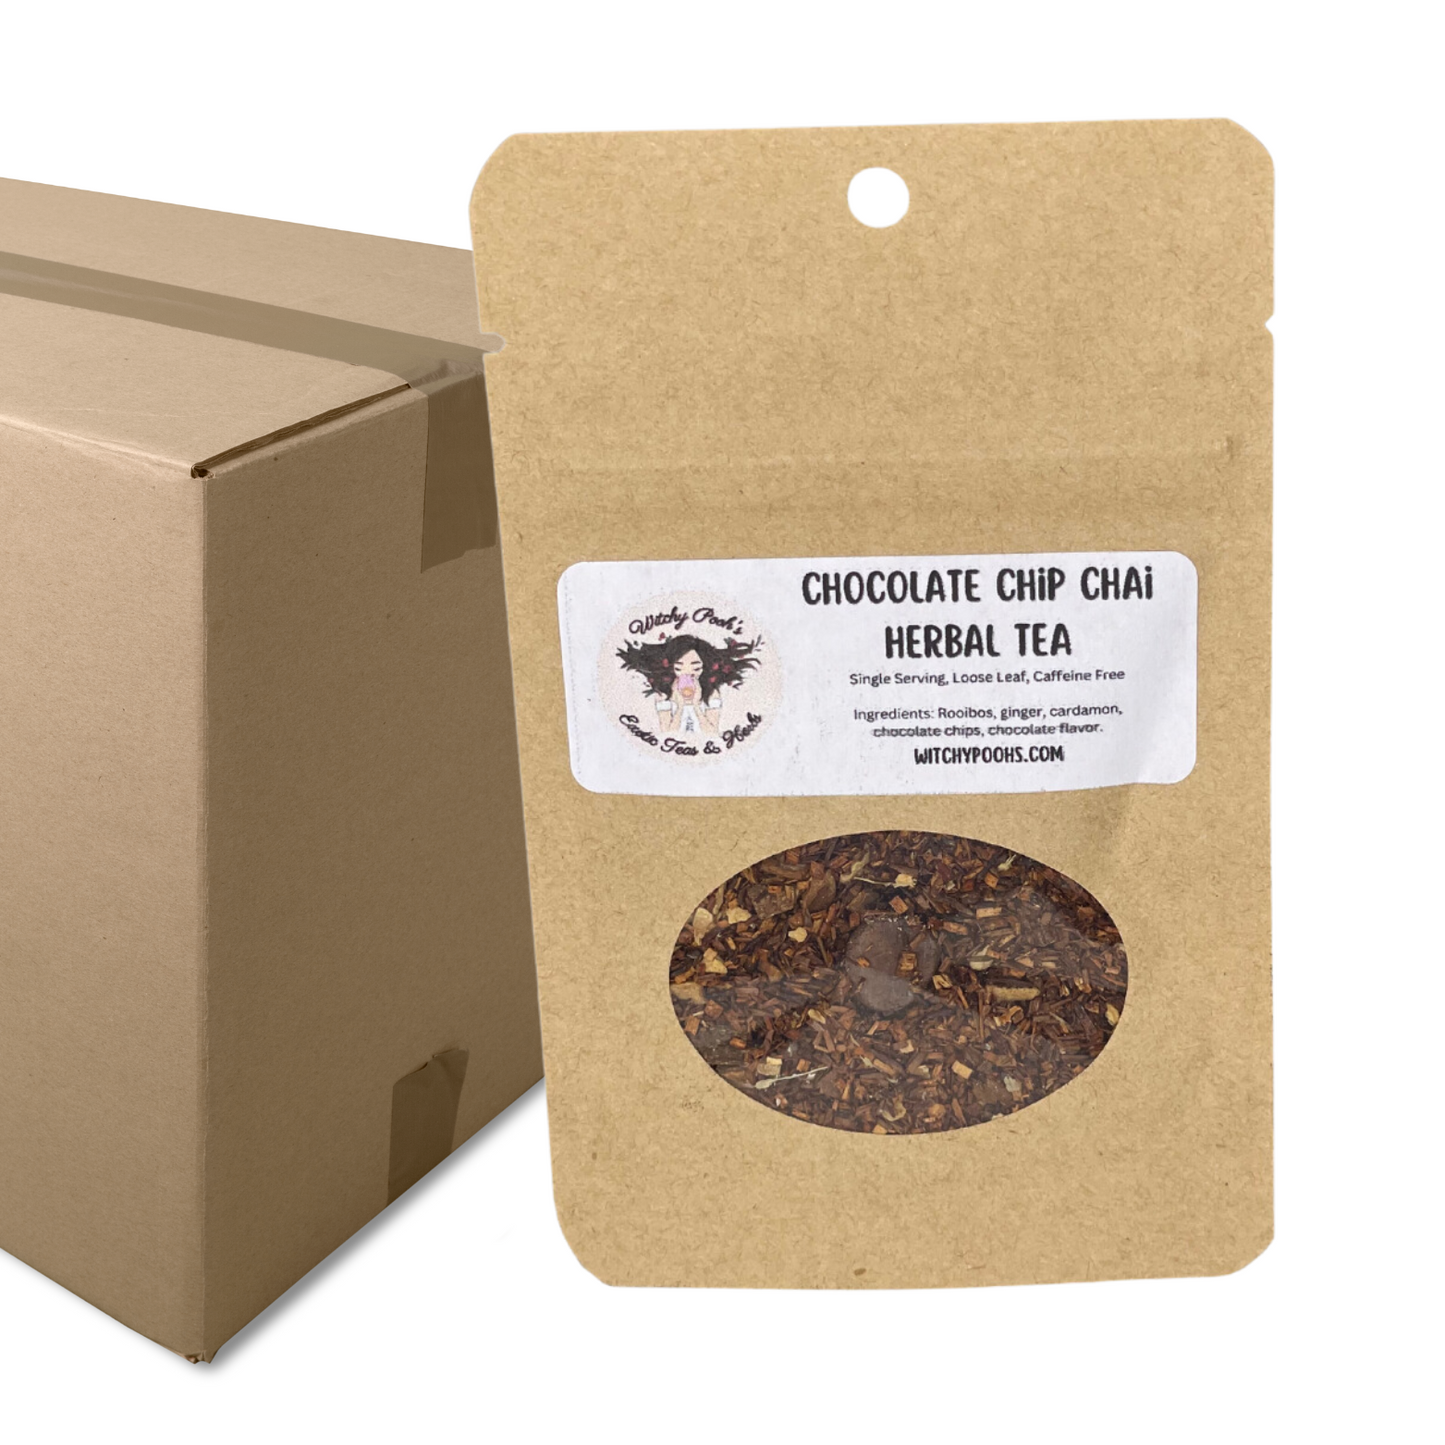 Chocolate Chip Chai Loose Leaf Rooibos Herbal Tea with Real Chocolate Chips!